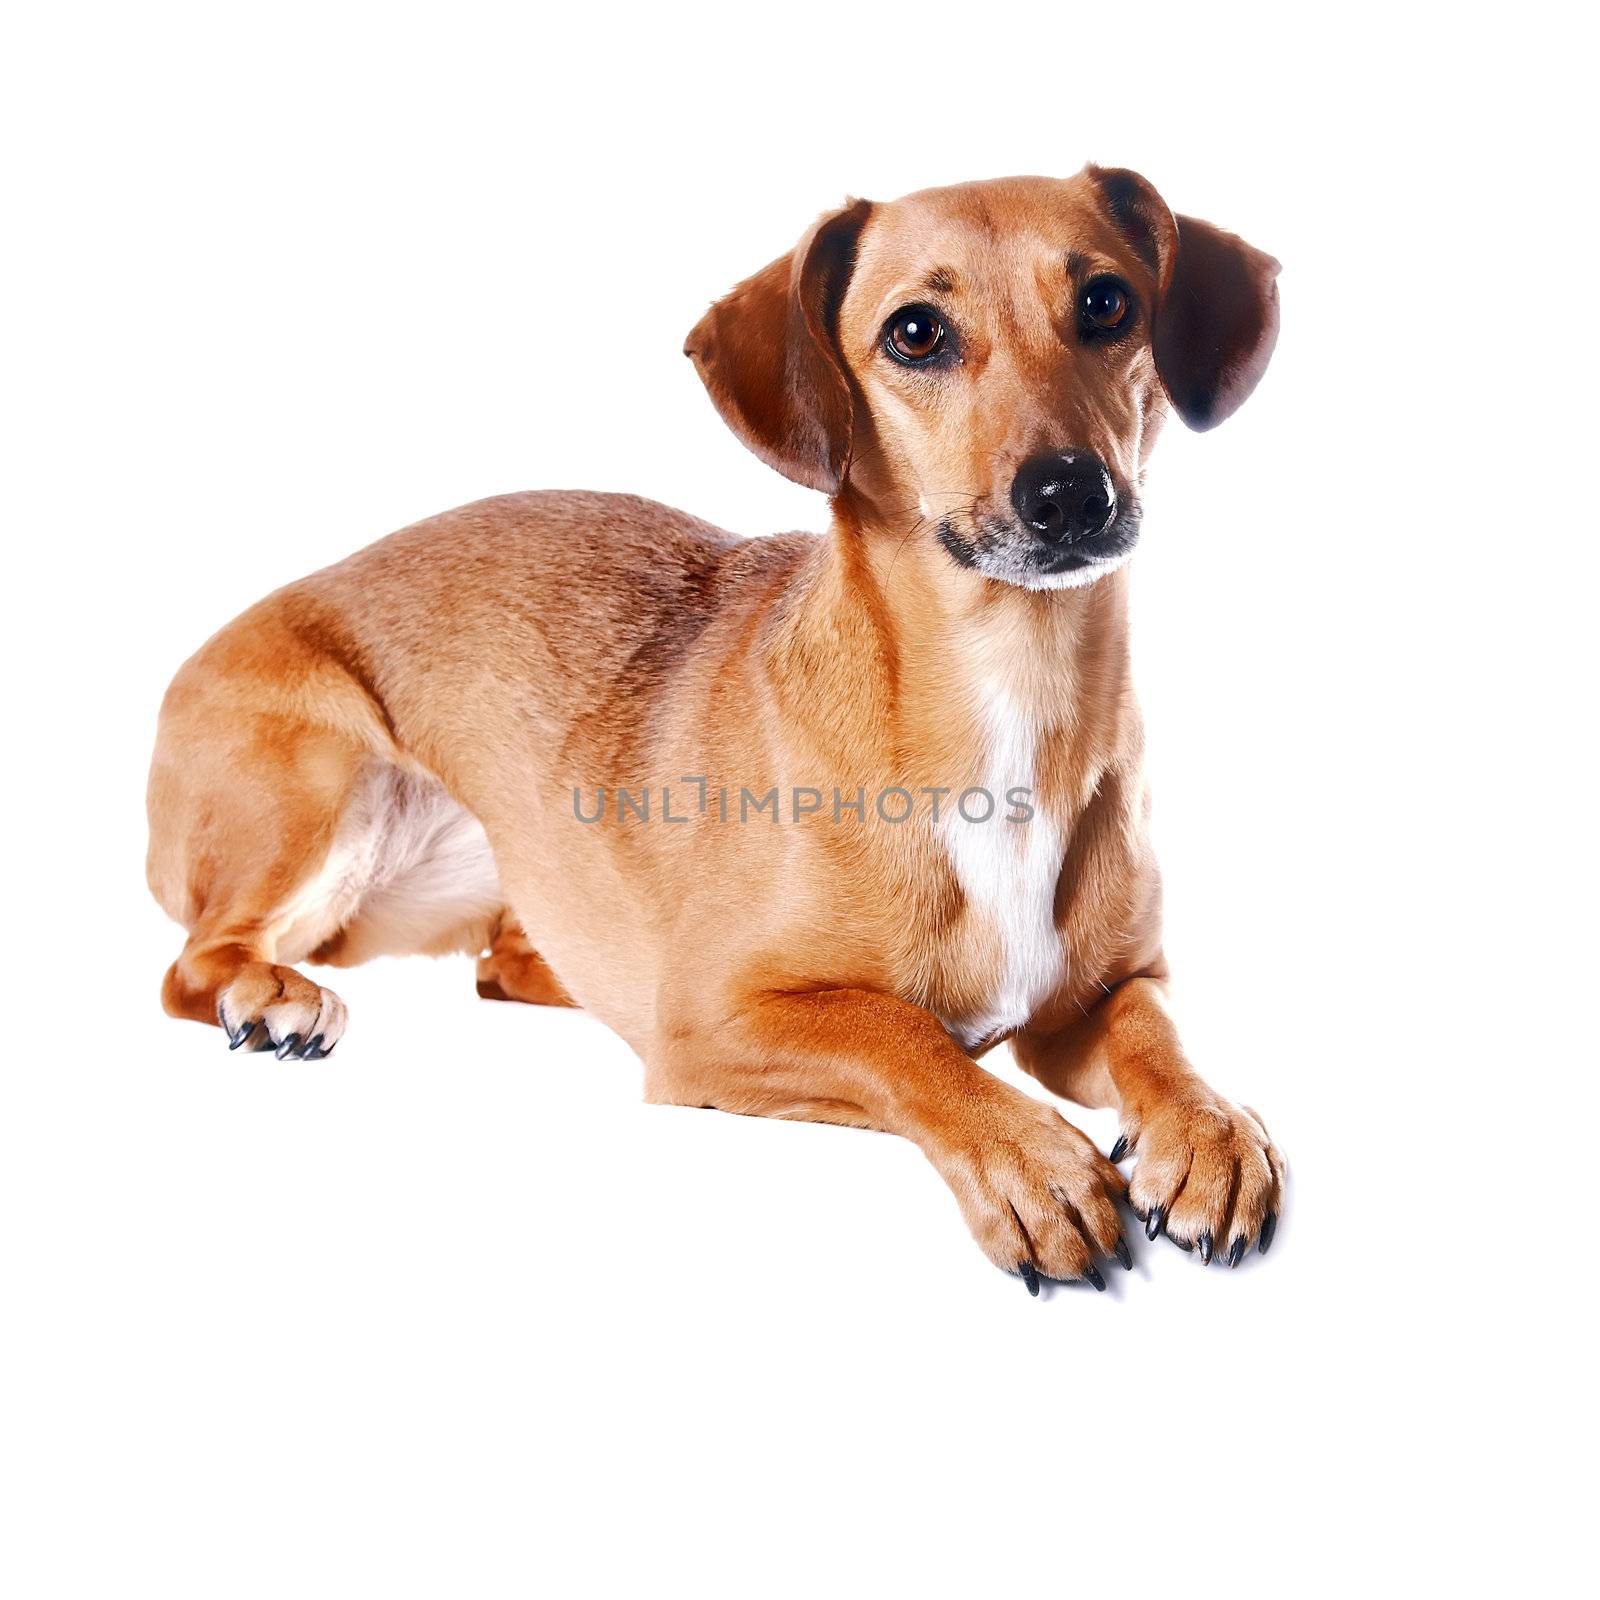 The red dachshund lies on a white background